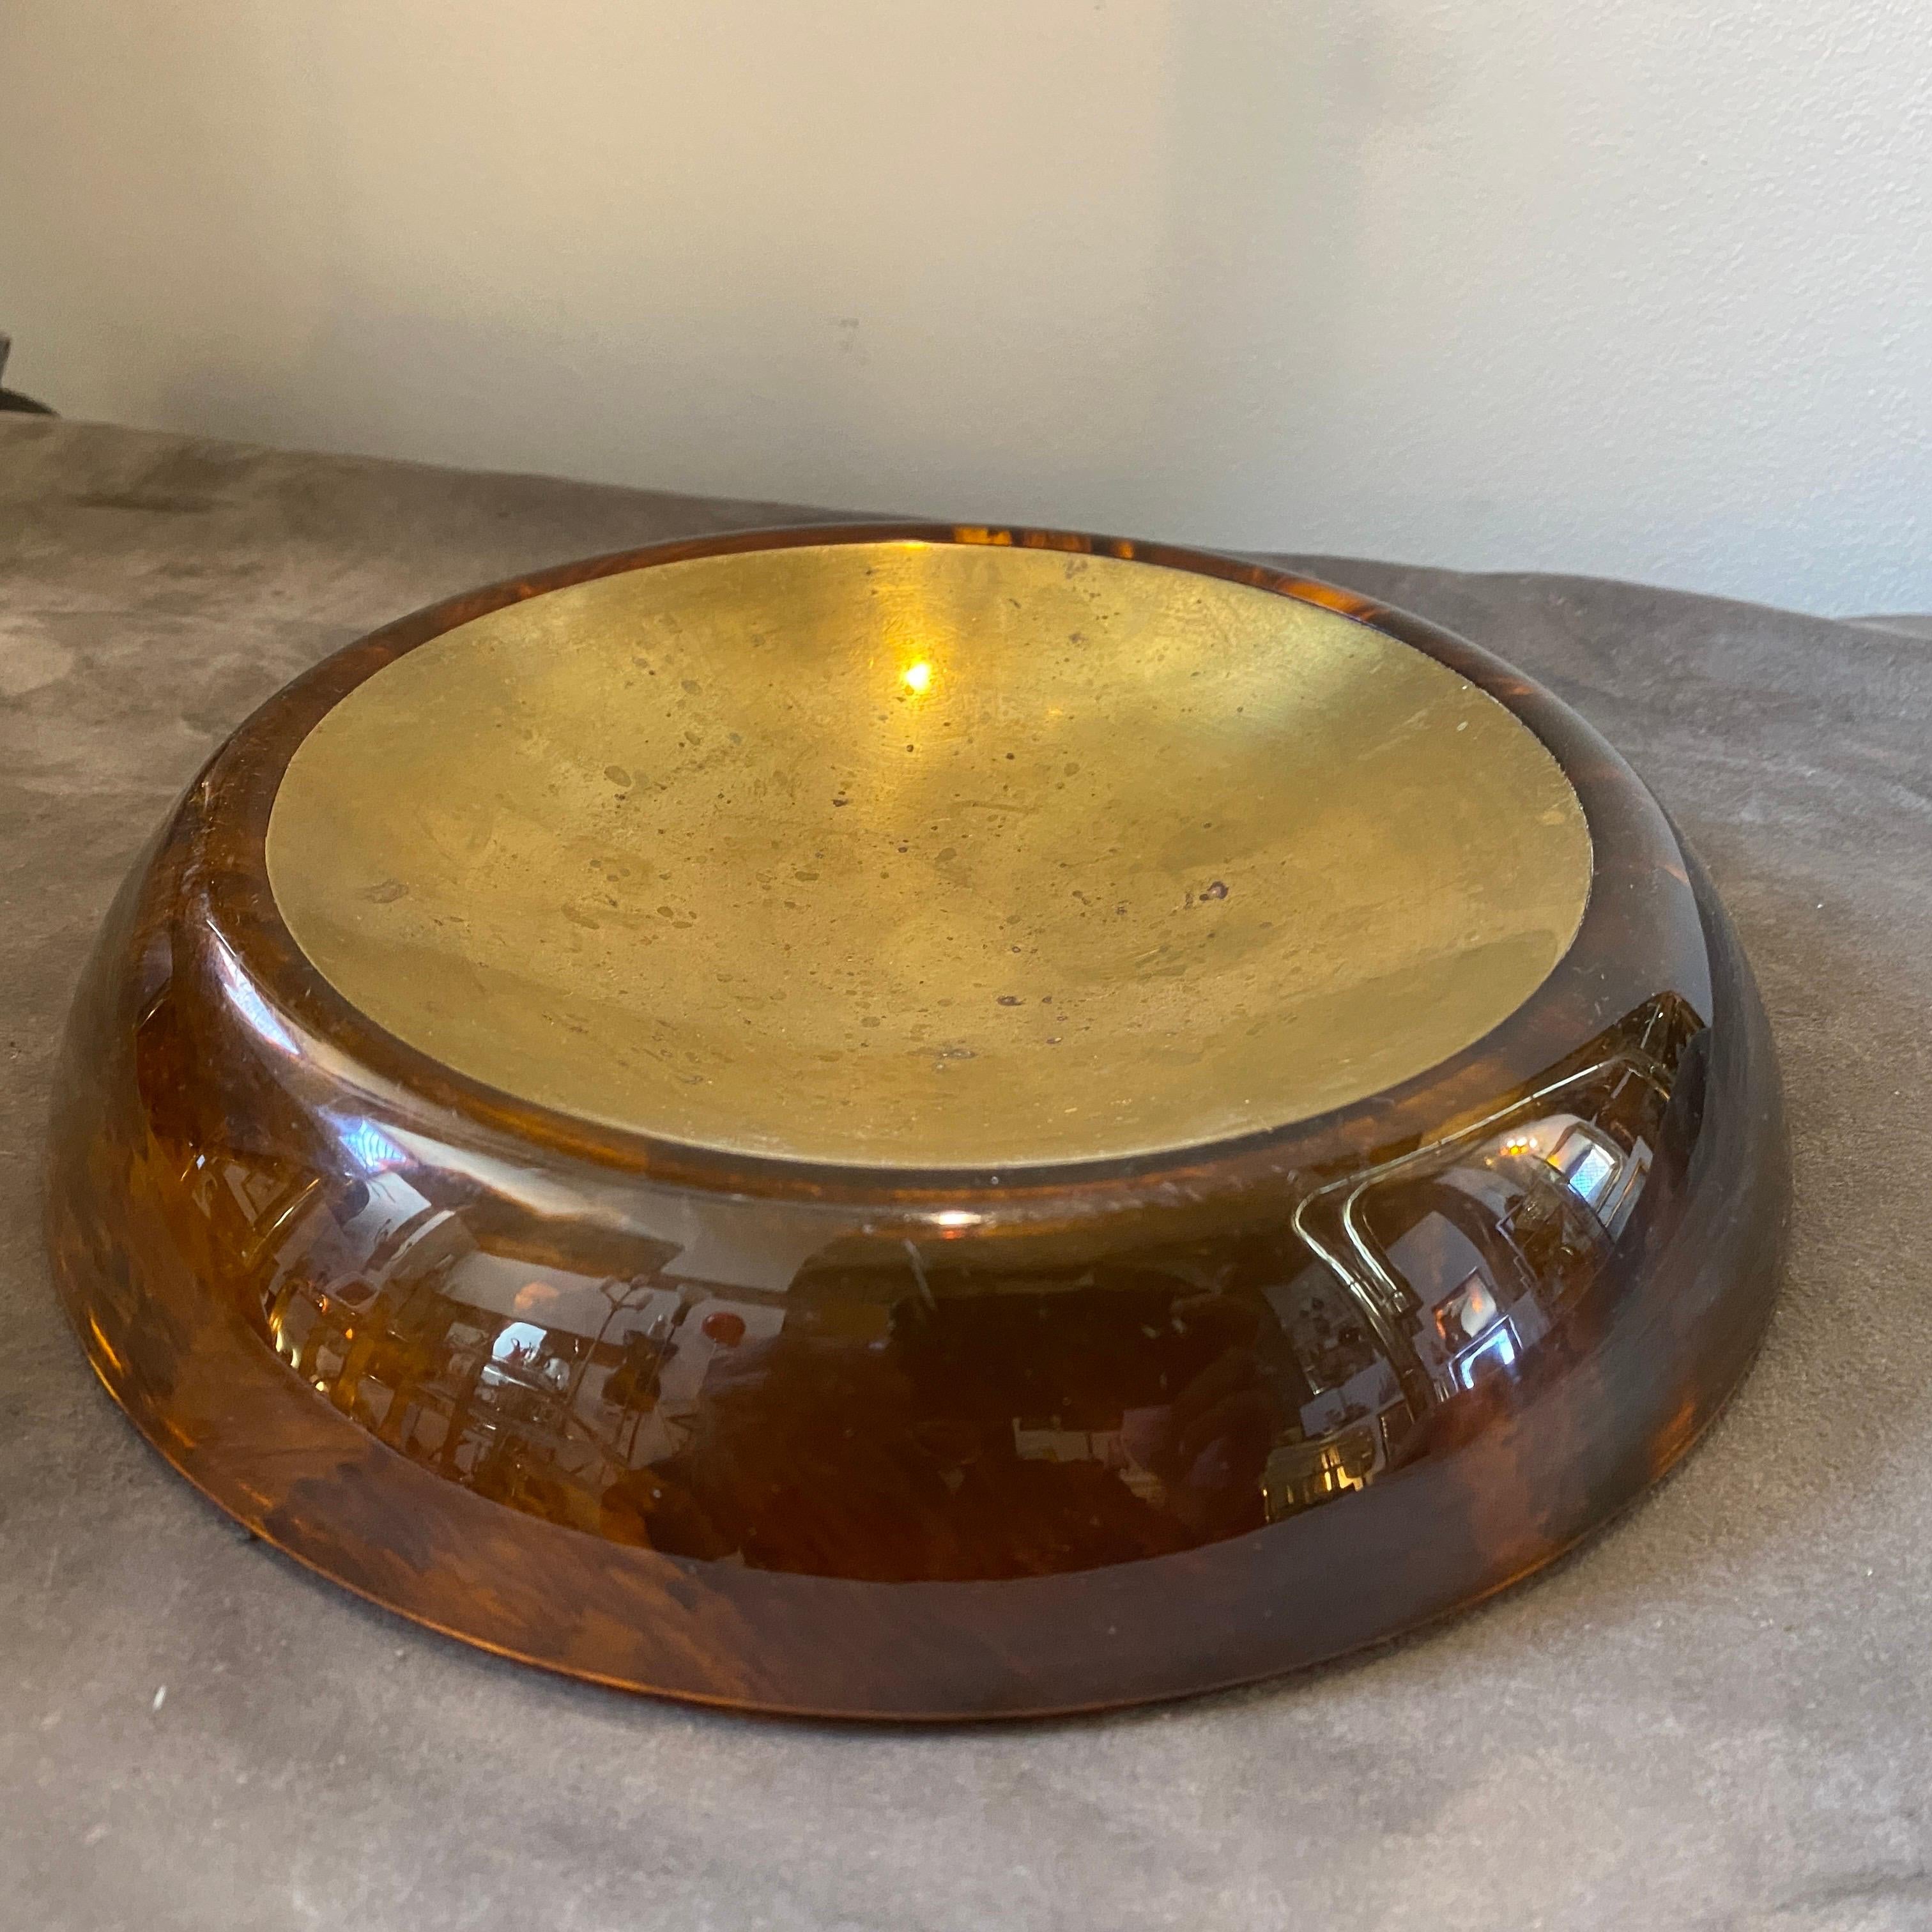 A Mid-Century Modern brass and lucite round ashtray designed and manufactured in Italy in the Eighties. Brass in original patina gives it a superb vintage look. It's in lovely conditions.